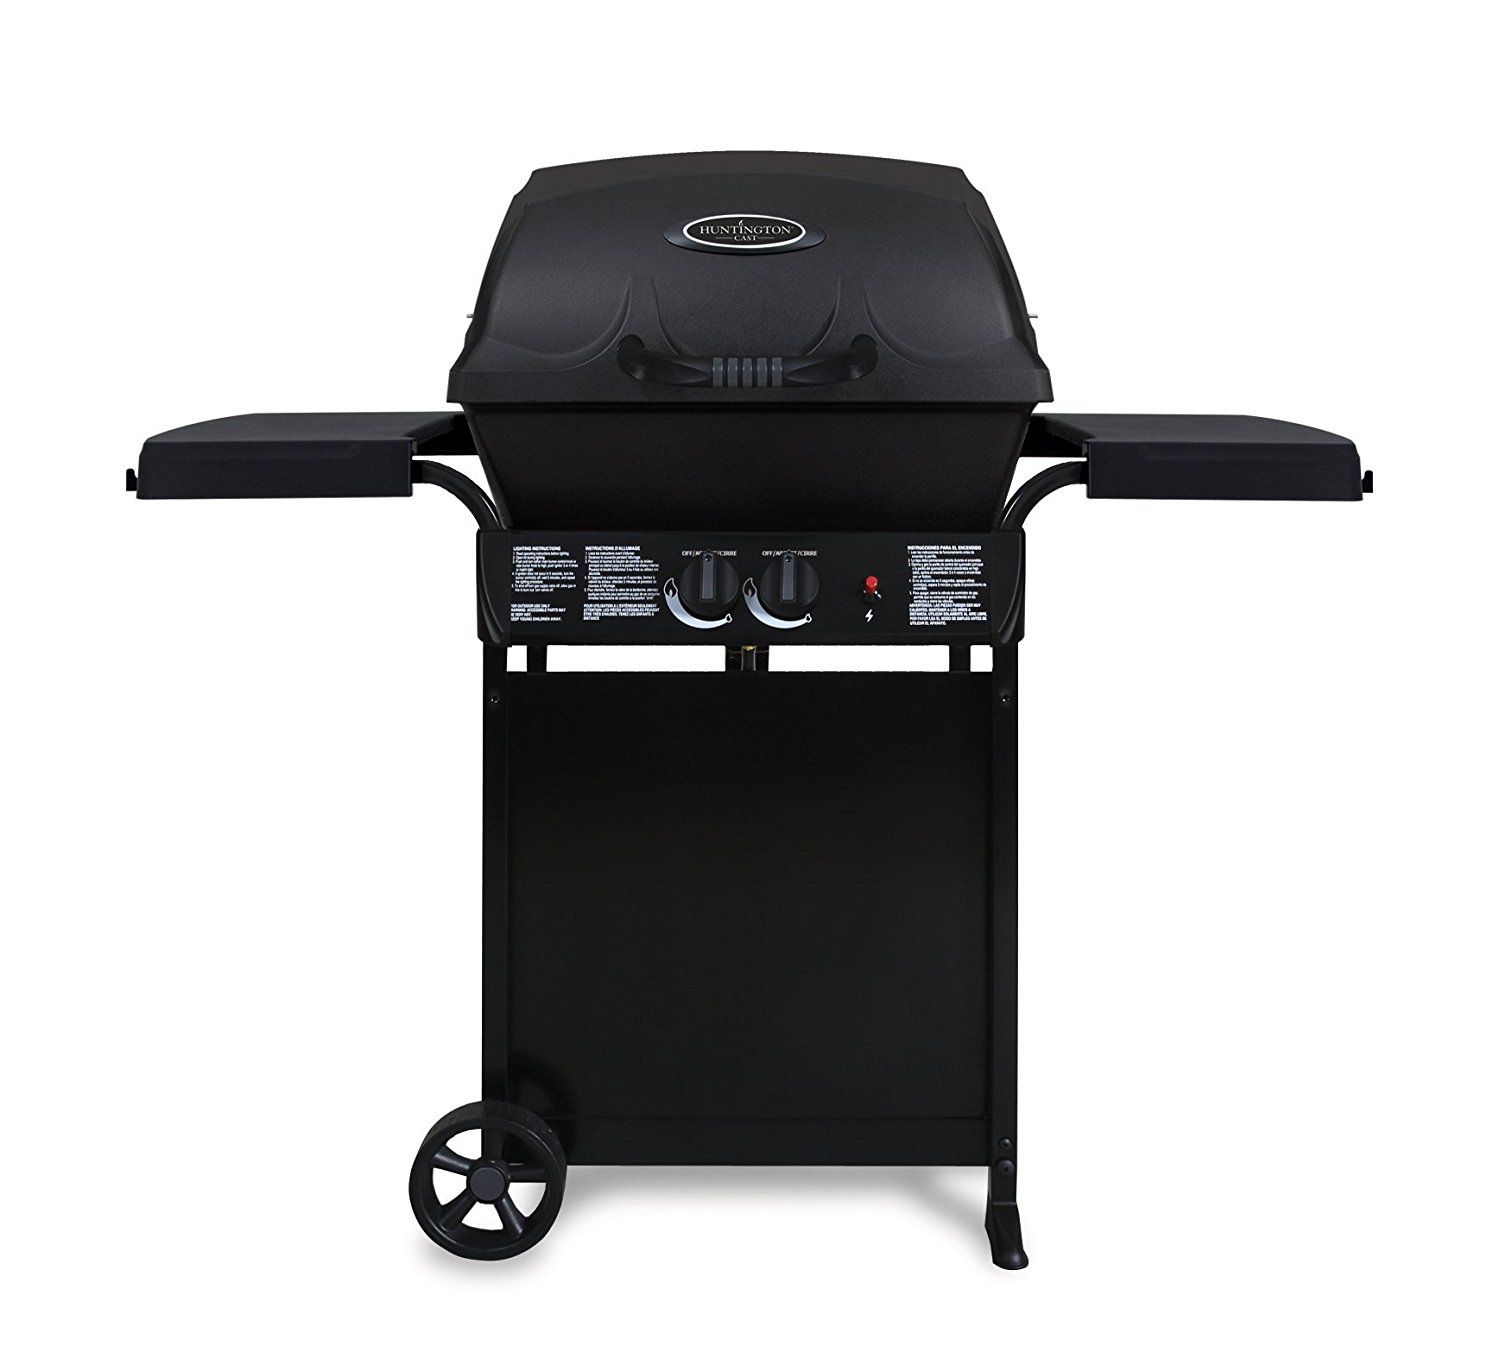 The 10 Best Low Cost Gas Grills To Buy In 2017